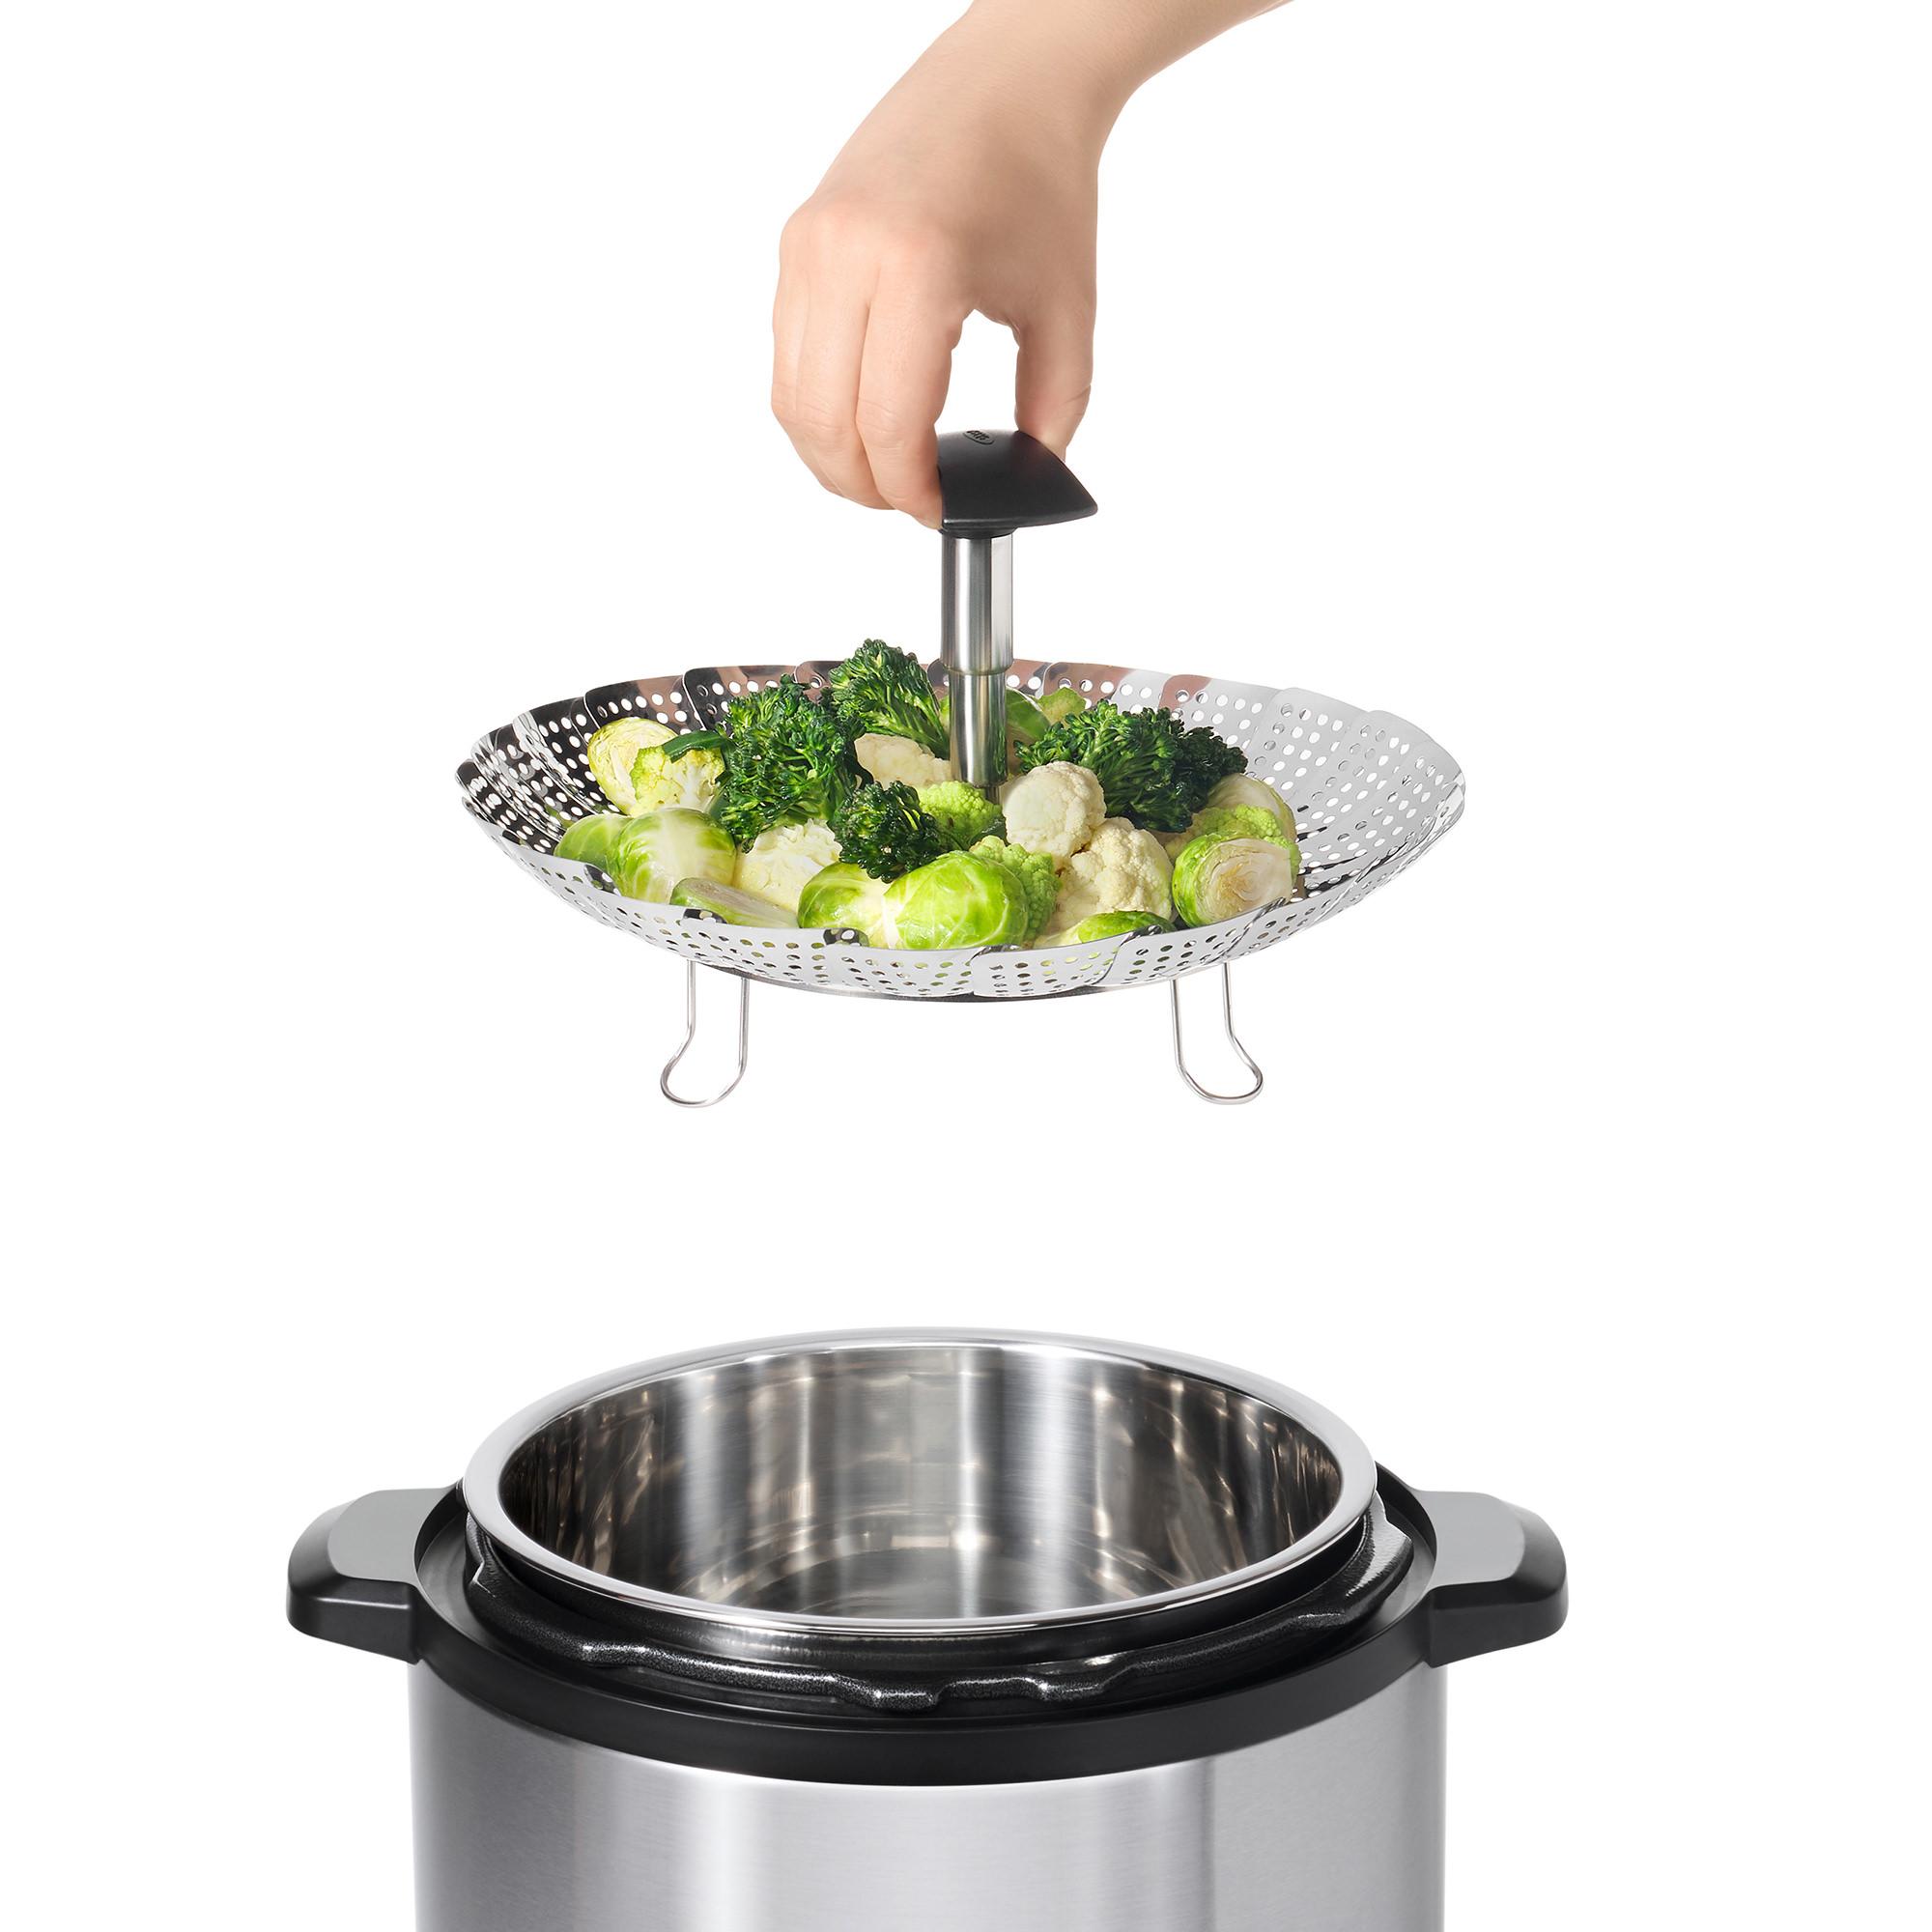 OXO Good Grips Steamer with Extendable Handle Image 3